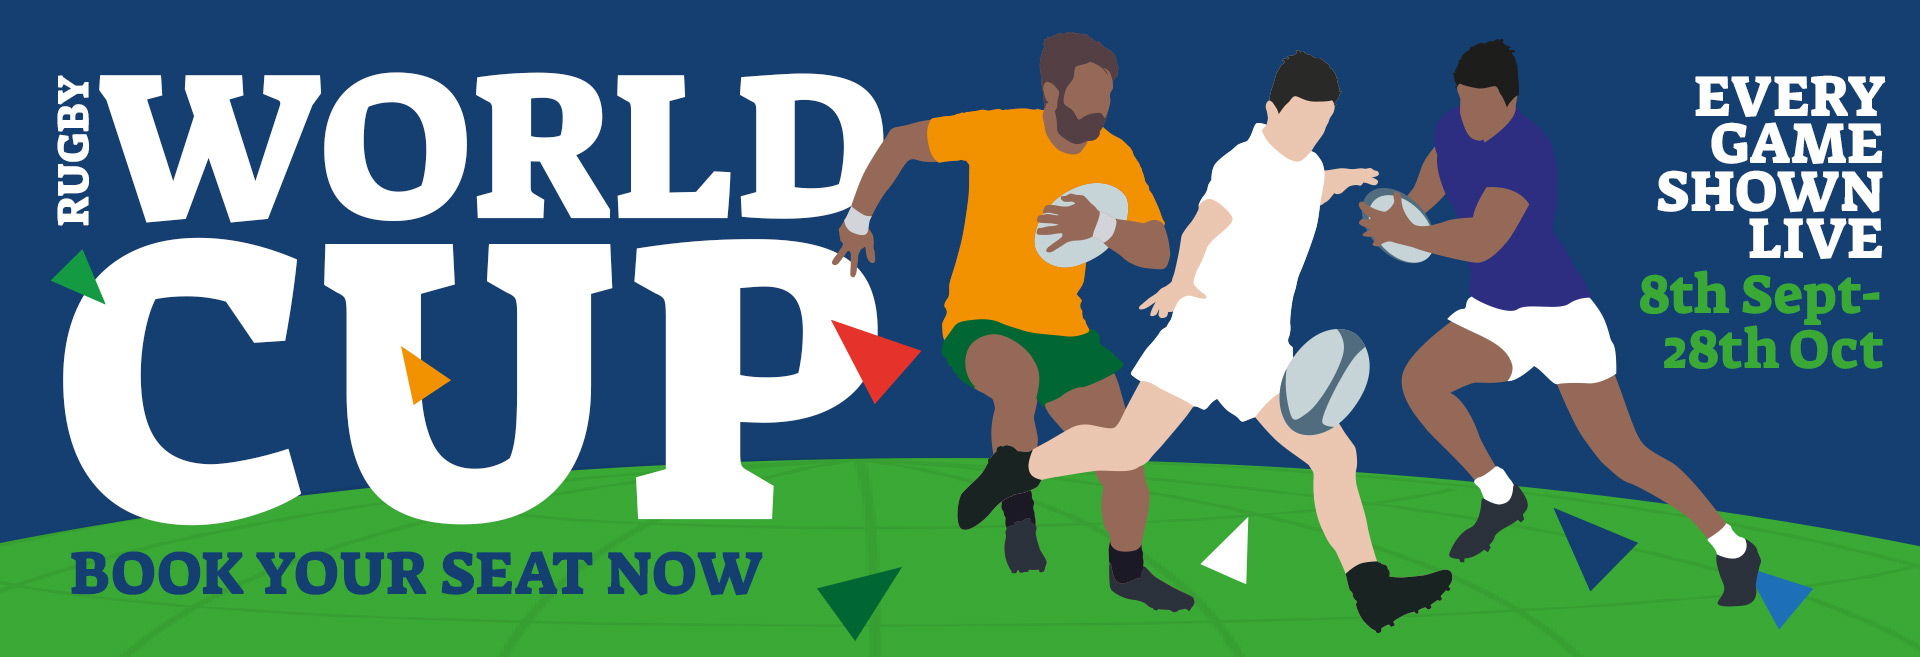 Watch the Rugby World Cup at The Devonshire Arms